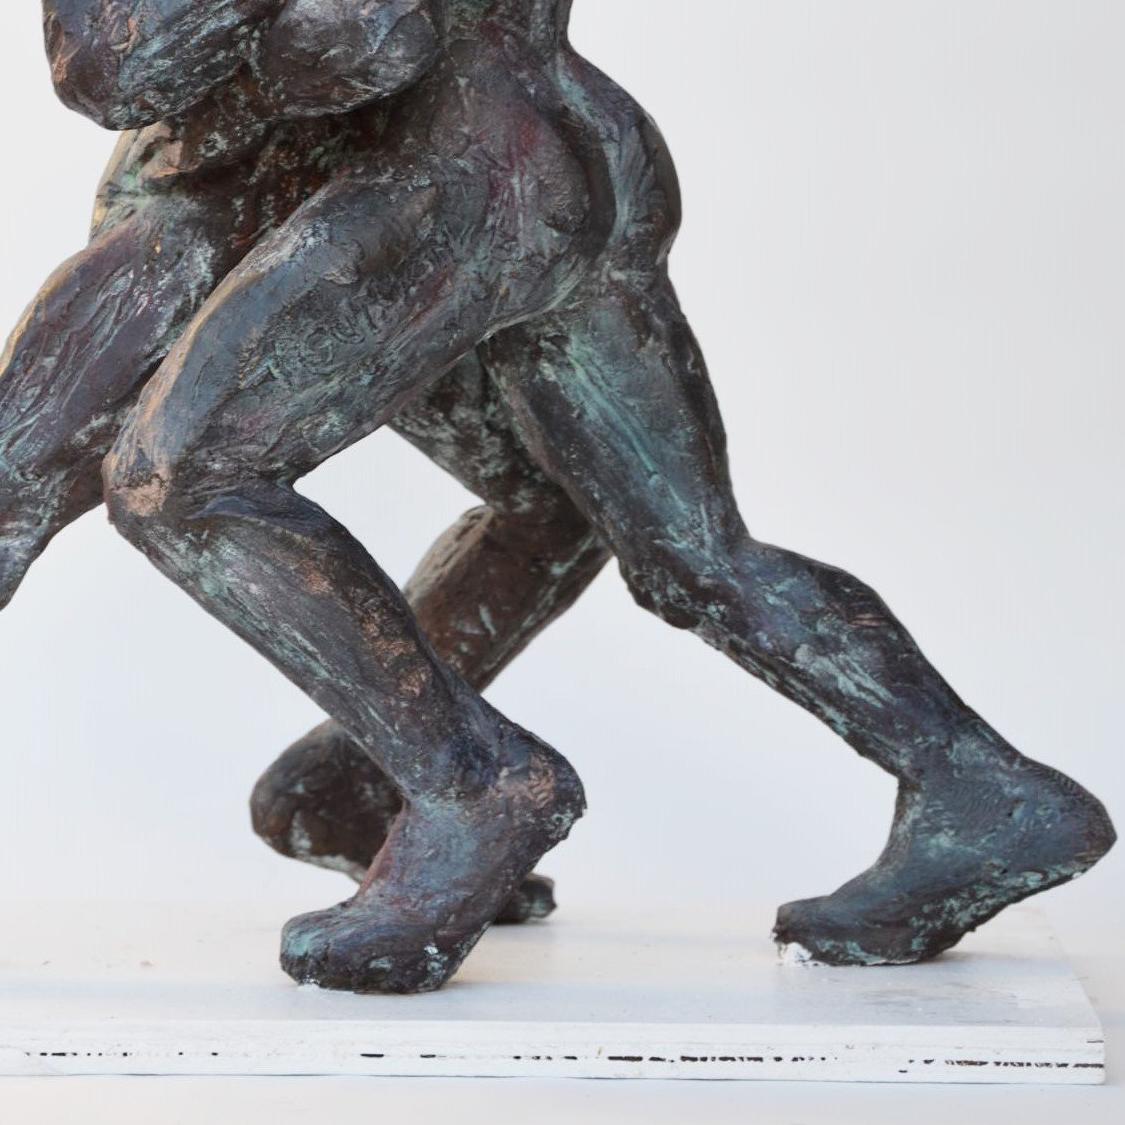 Wrestlers VIII, is a bronze sculpture by French contemporary artist Yann Guillon. It depicts two men engaged in a wrestling bout. 55 cm × 40 cm × 25 cm.
Yann Guillon focuses his work on the human body, using an expressionist approach to convey